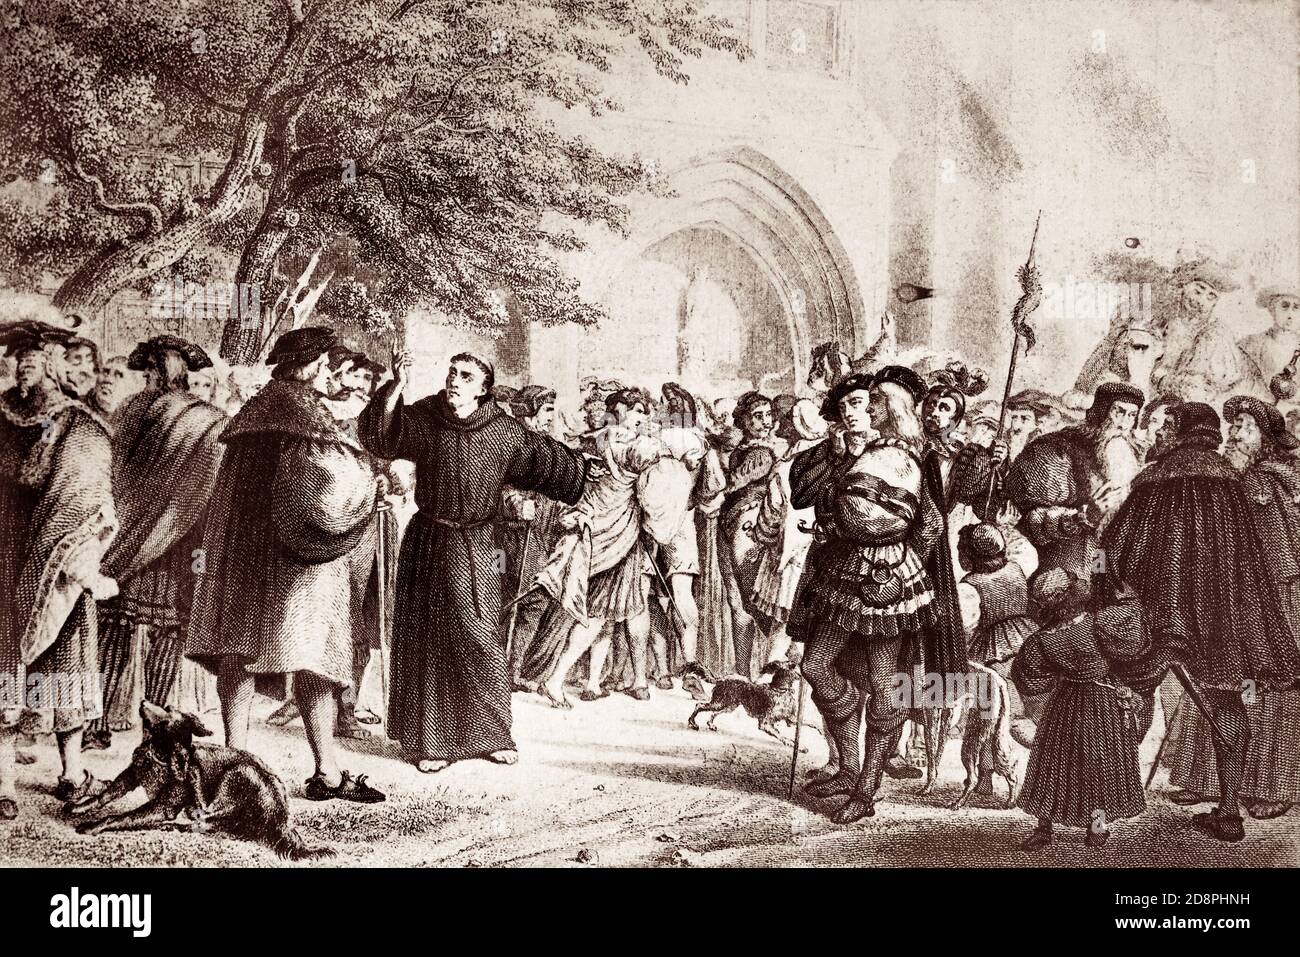 Engraving of Martin Luther (1483-1546), a key figure in the Protestant Reformation, after he nailed the Ninety-Five Theses, or “Disputation on the Power and Efficacy of Indulgences,” on the door of All Saints' Church in Wittenberg in 1517. Stock Photo